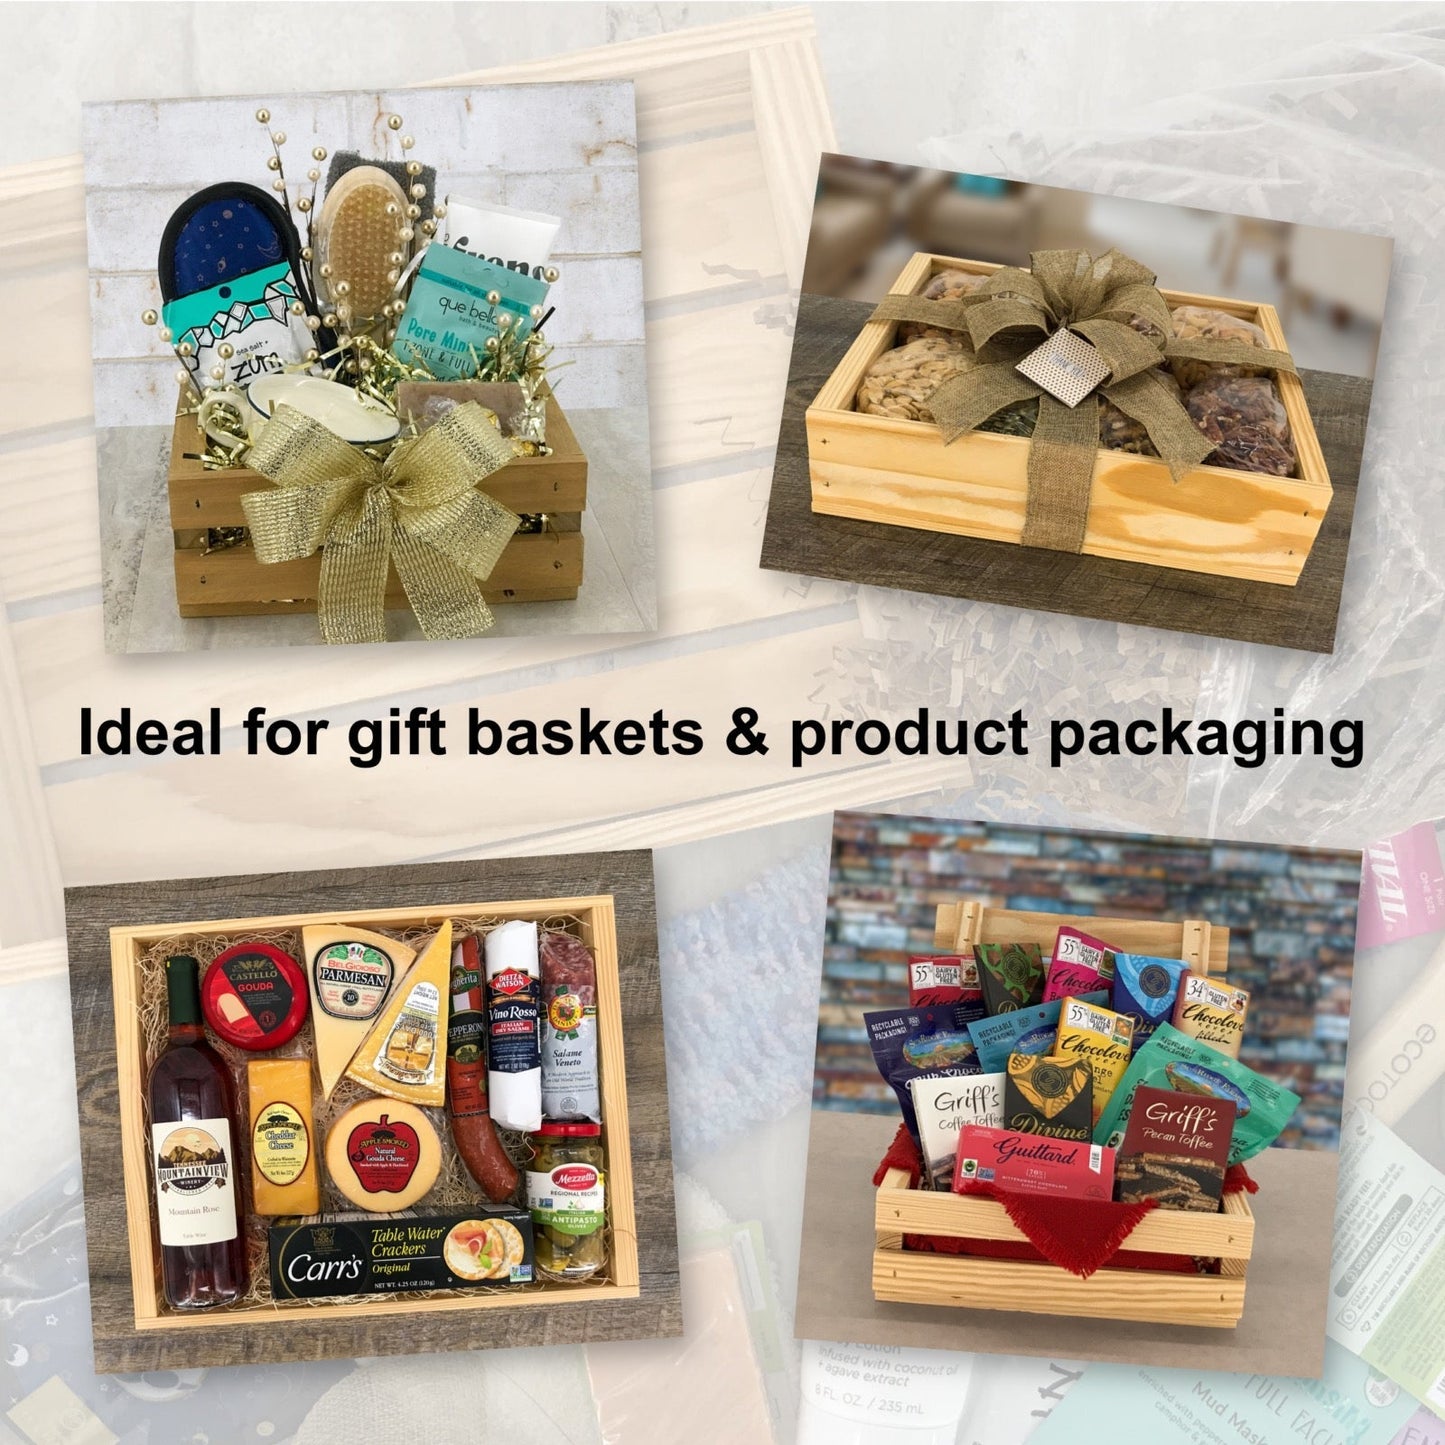 Ideal for gift baskets and product packaging, SS-12-10-2.5-ST-NW-NL, 6-SS-12-10-2.5-ST-NW-NL, 12-SS-12-10-2.5-ST-NW-NL, 24-SS-12-10-2.5-ST-NW-NL, 48-SS-12-10-2.5-ST-NW-NL, 96-SS-12-10-2.5-ST-NW-NL